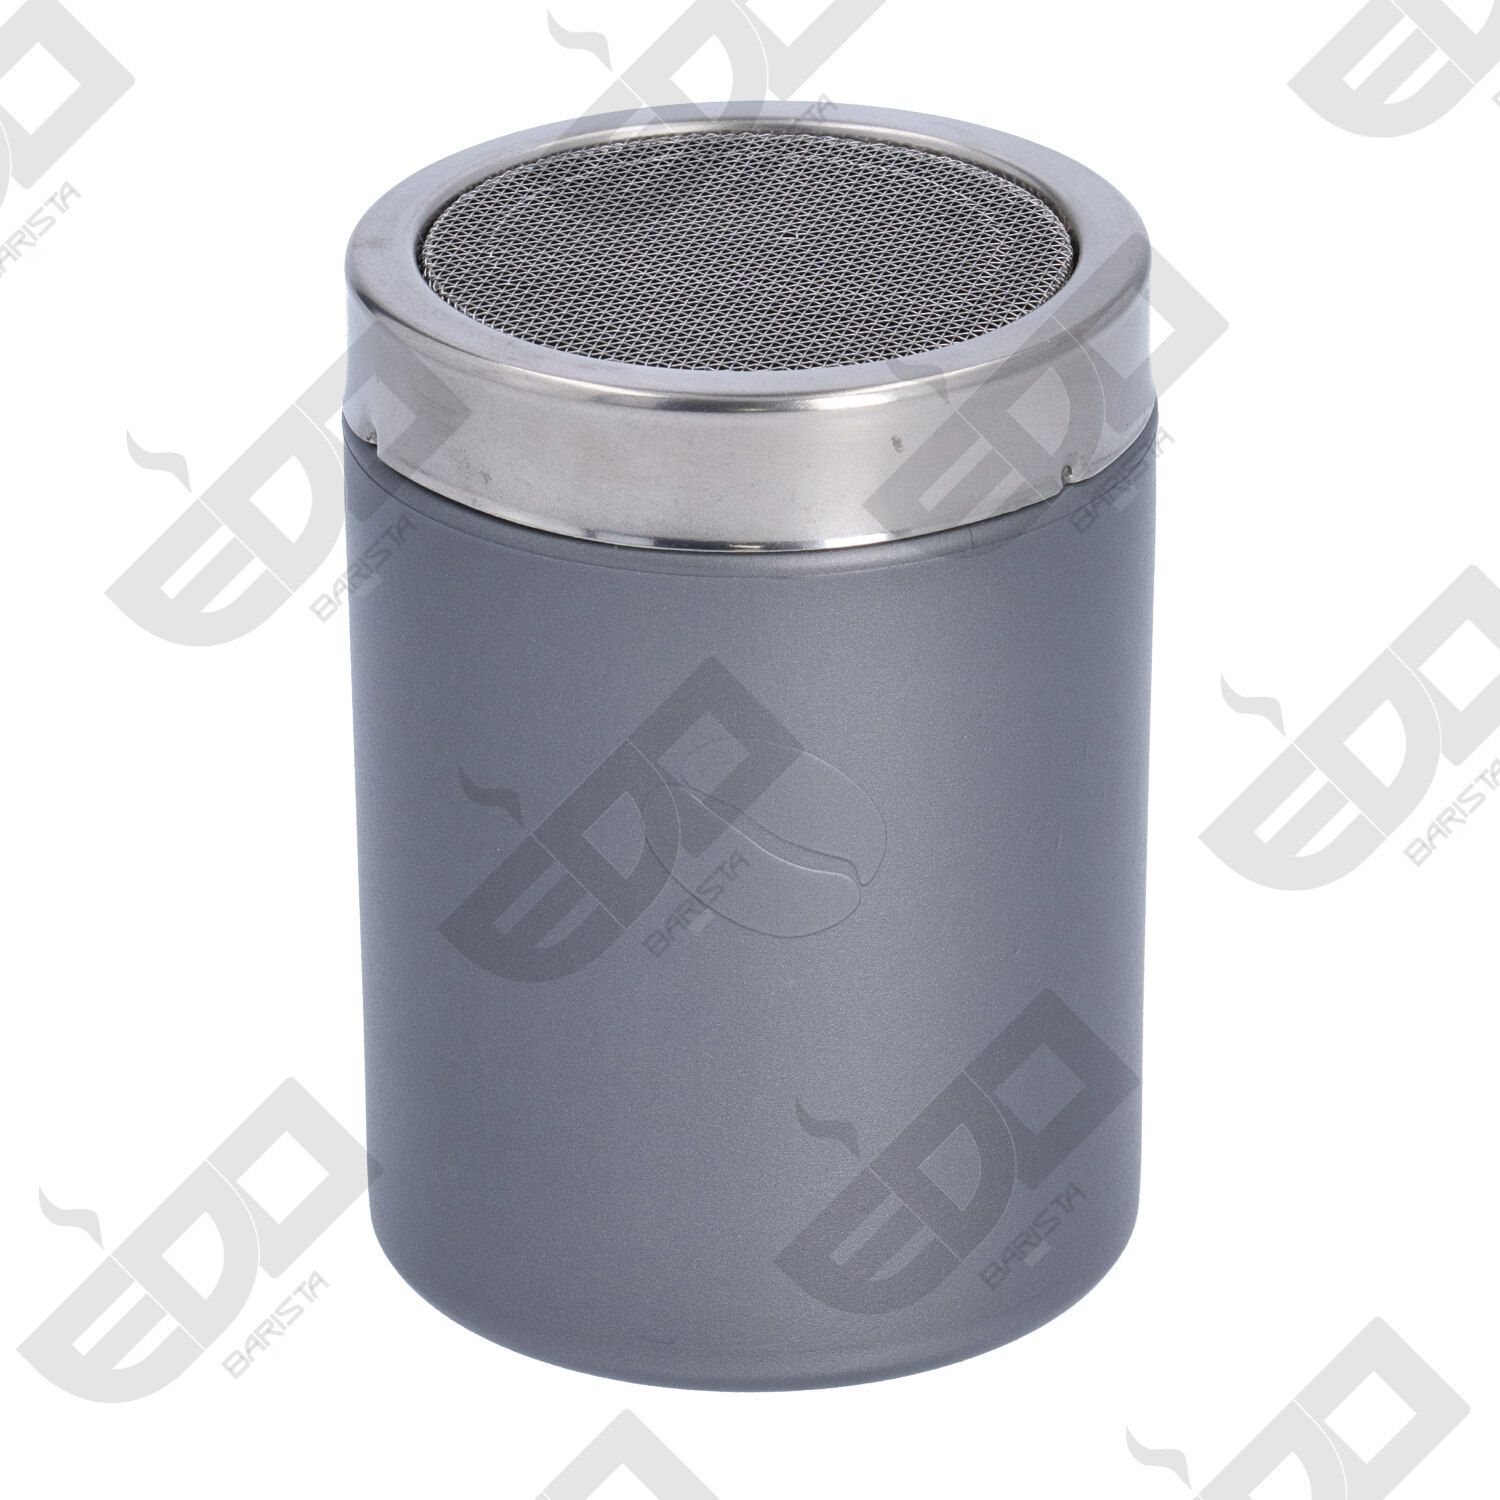 SILVER COCOA SHAKER WITH SMALL HOLES